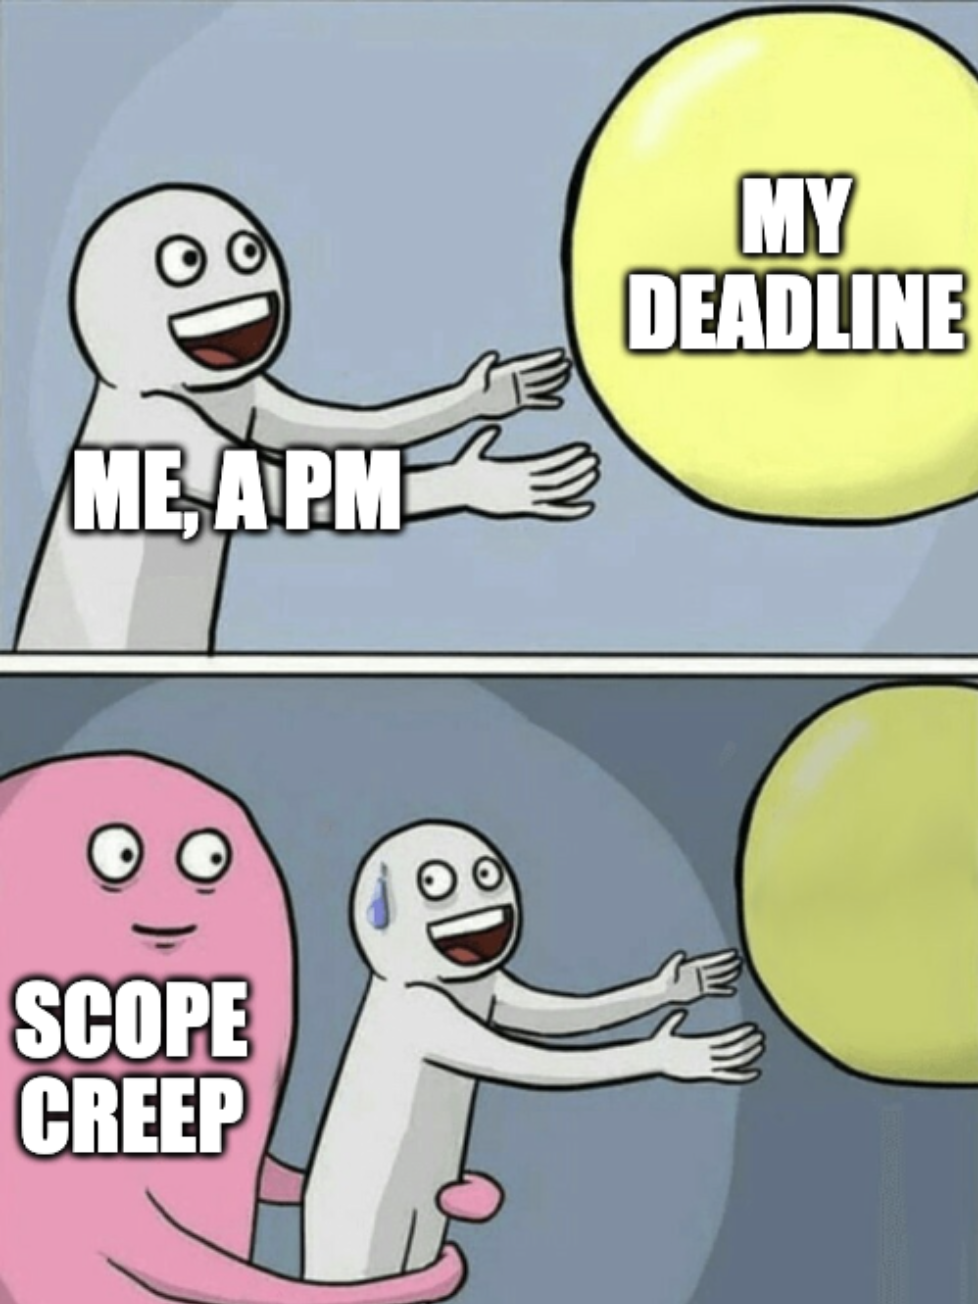 project management meme: a PM getting pulled away from a deadline due to scope creep